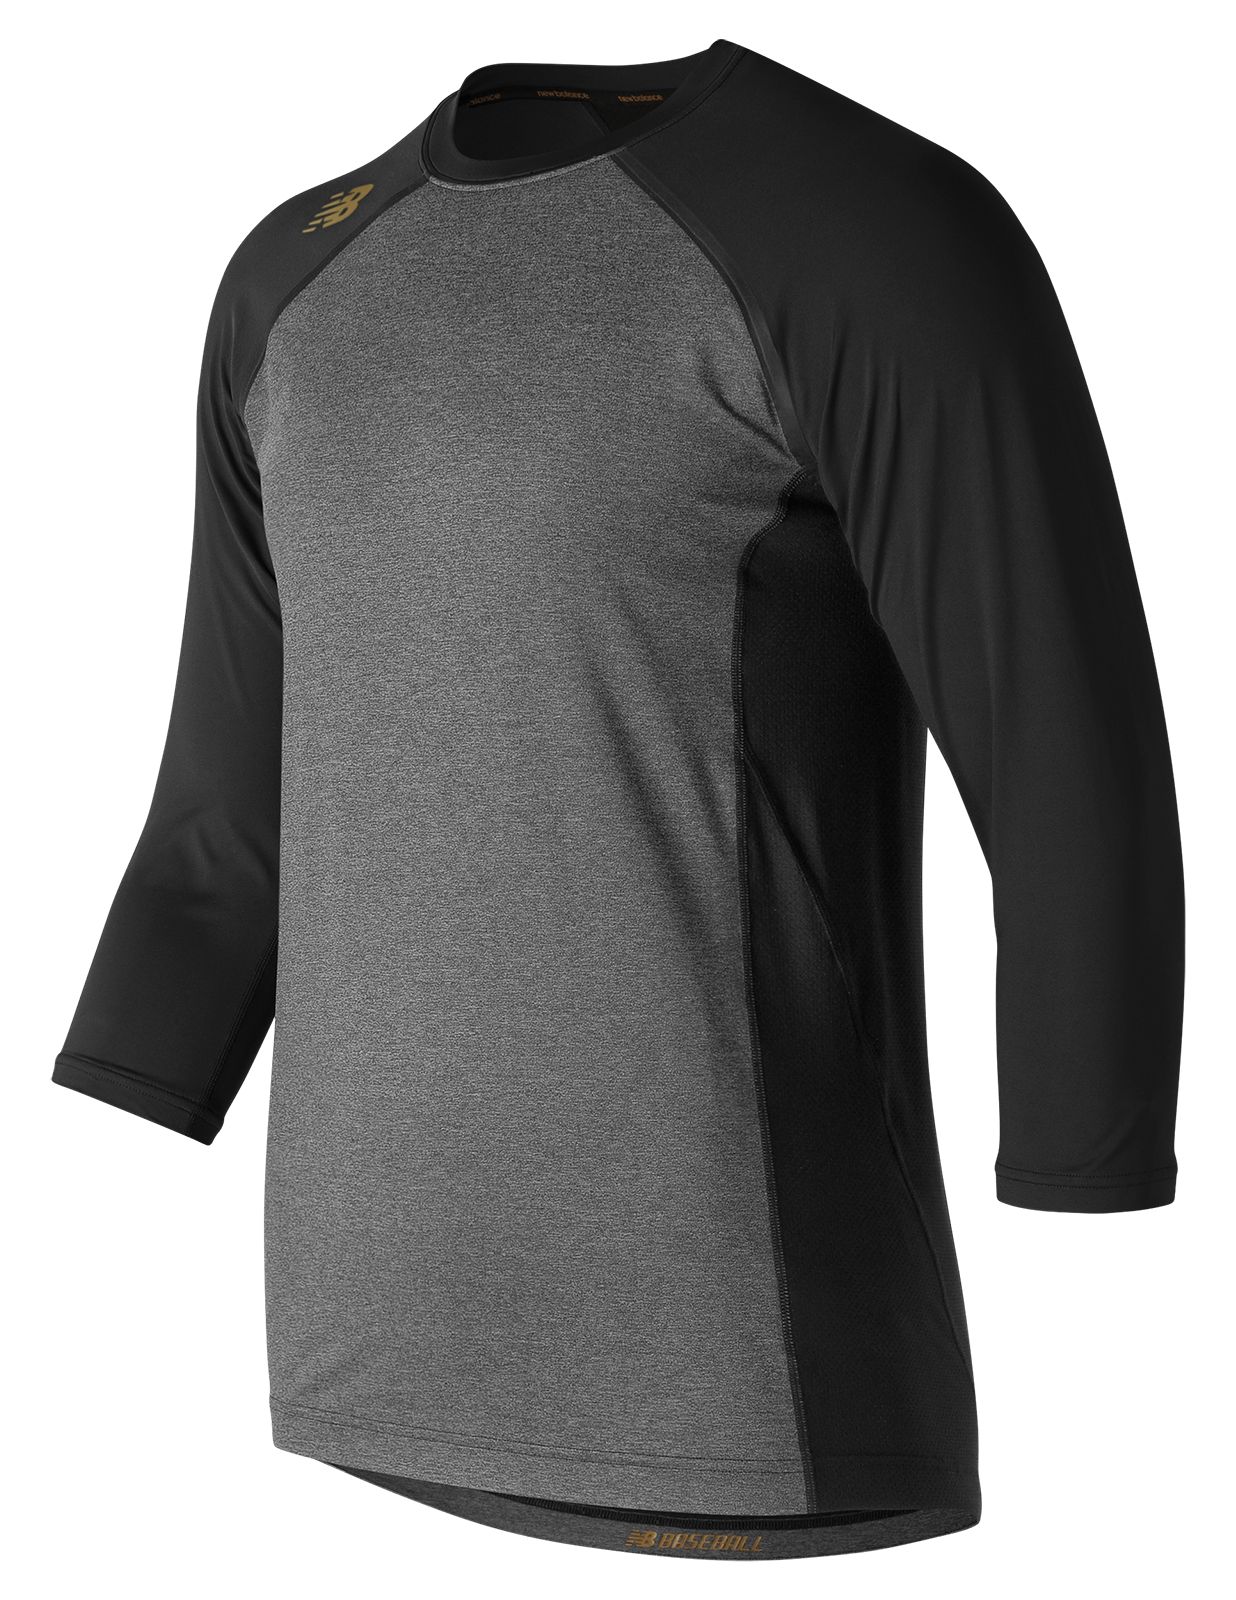  *Markdown*  Men's 4040 Bold and Gold Compression Top